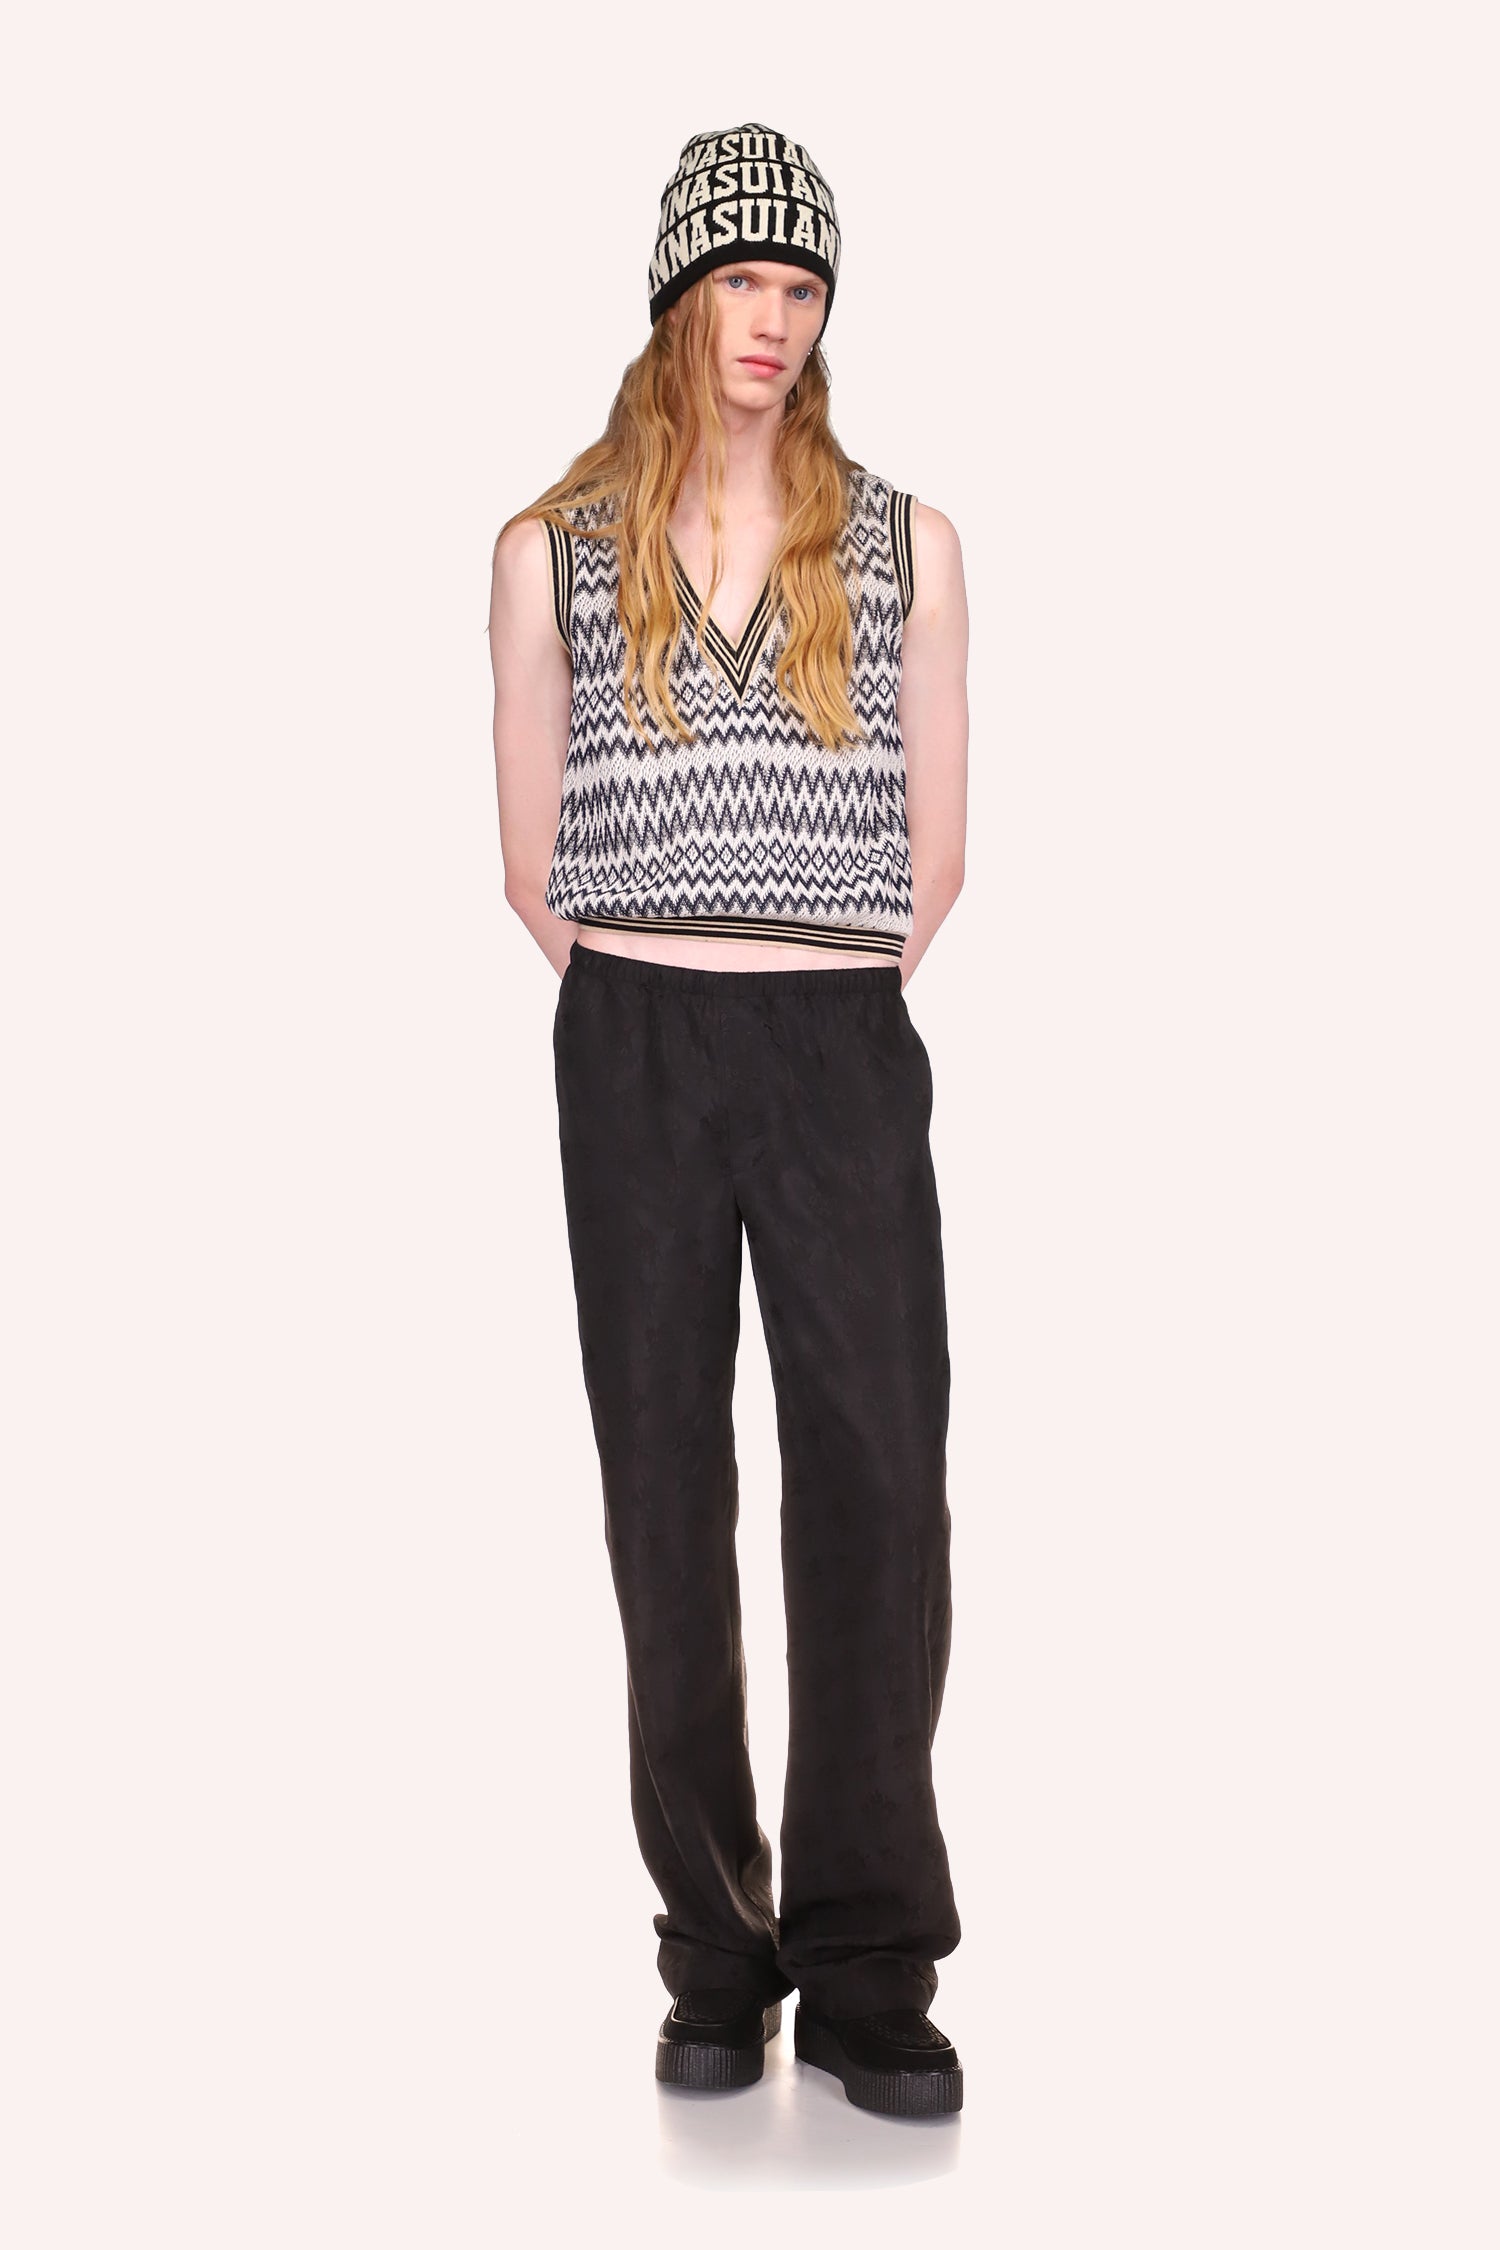 Floral Jacquard Pants is Black, long over the shoes, with a waist band paired with Zigzag Vest Black 